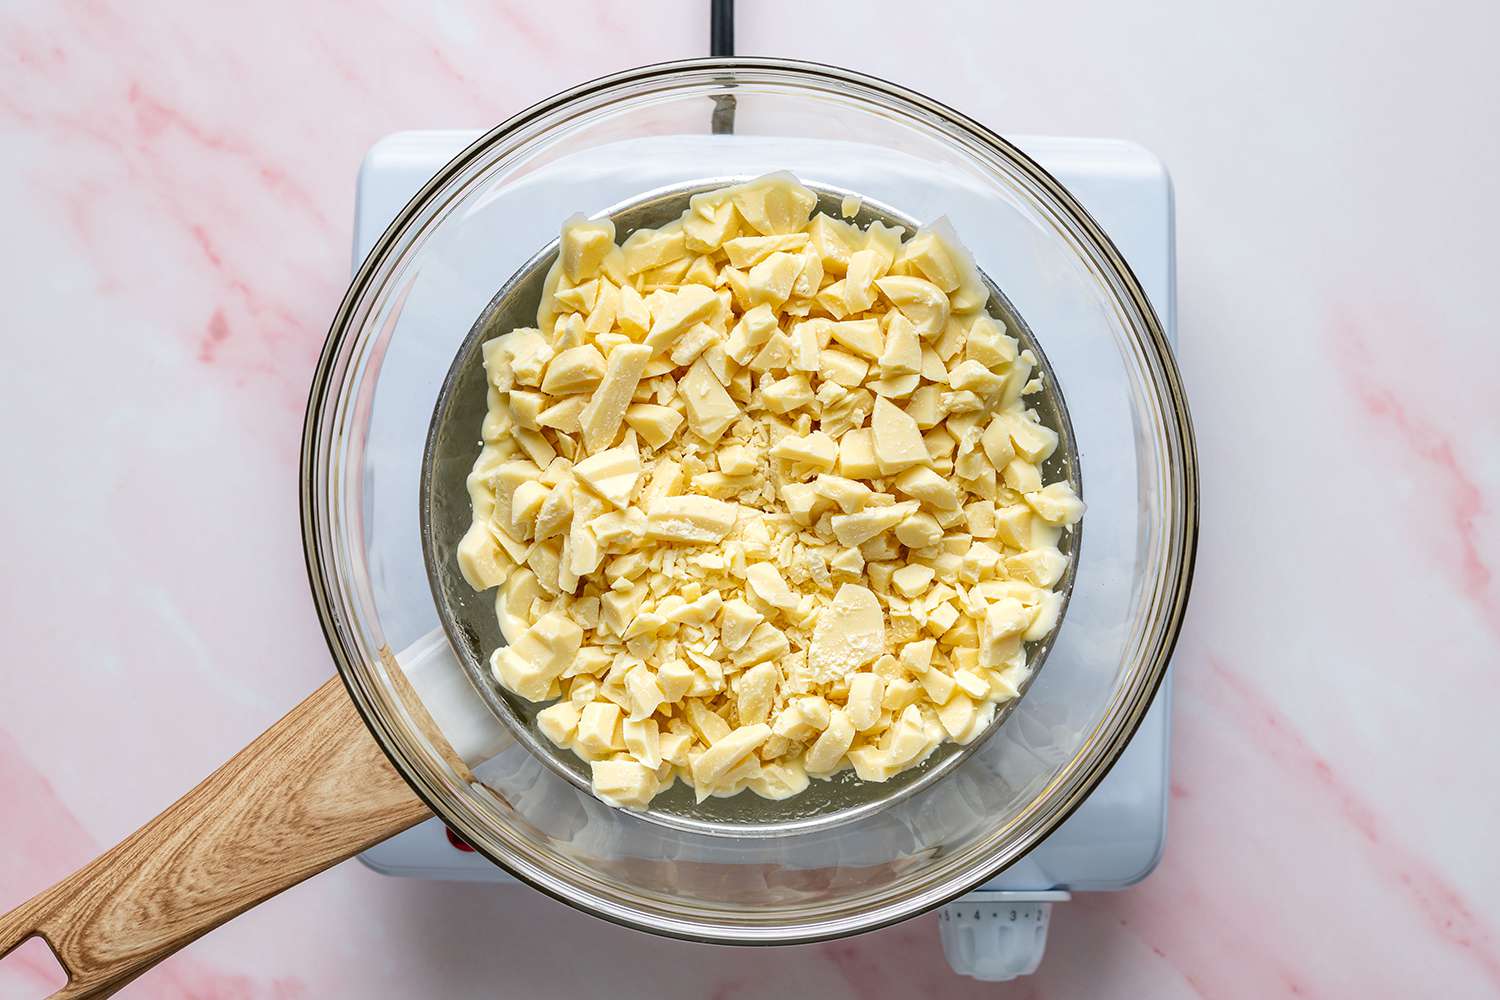 white chocolate in a double boiler